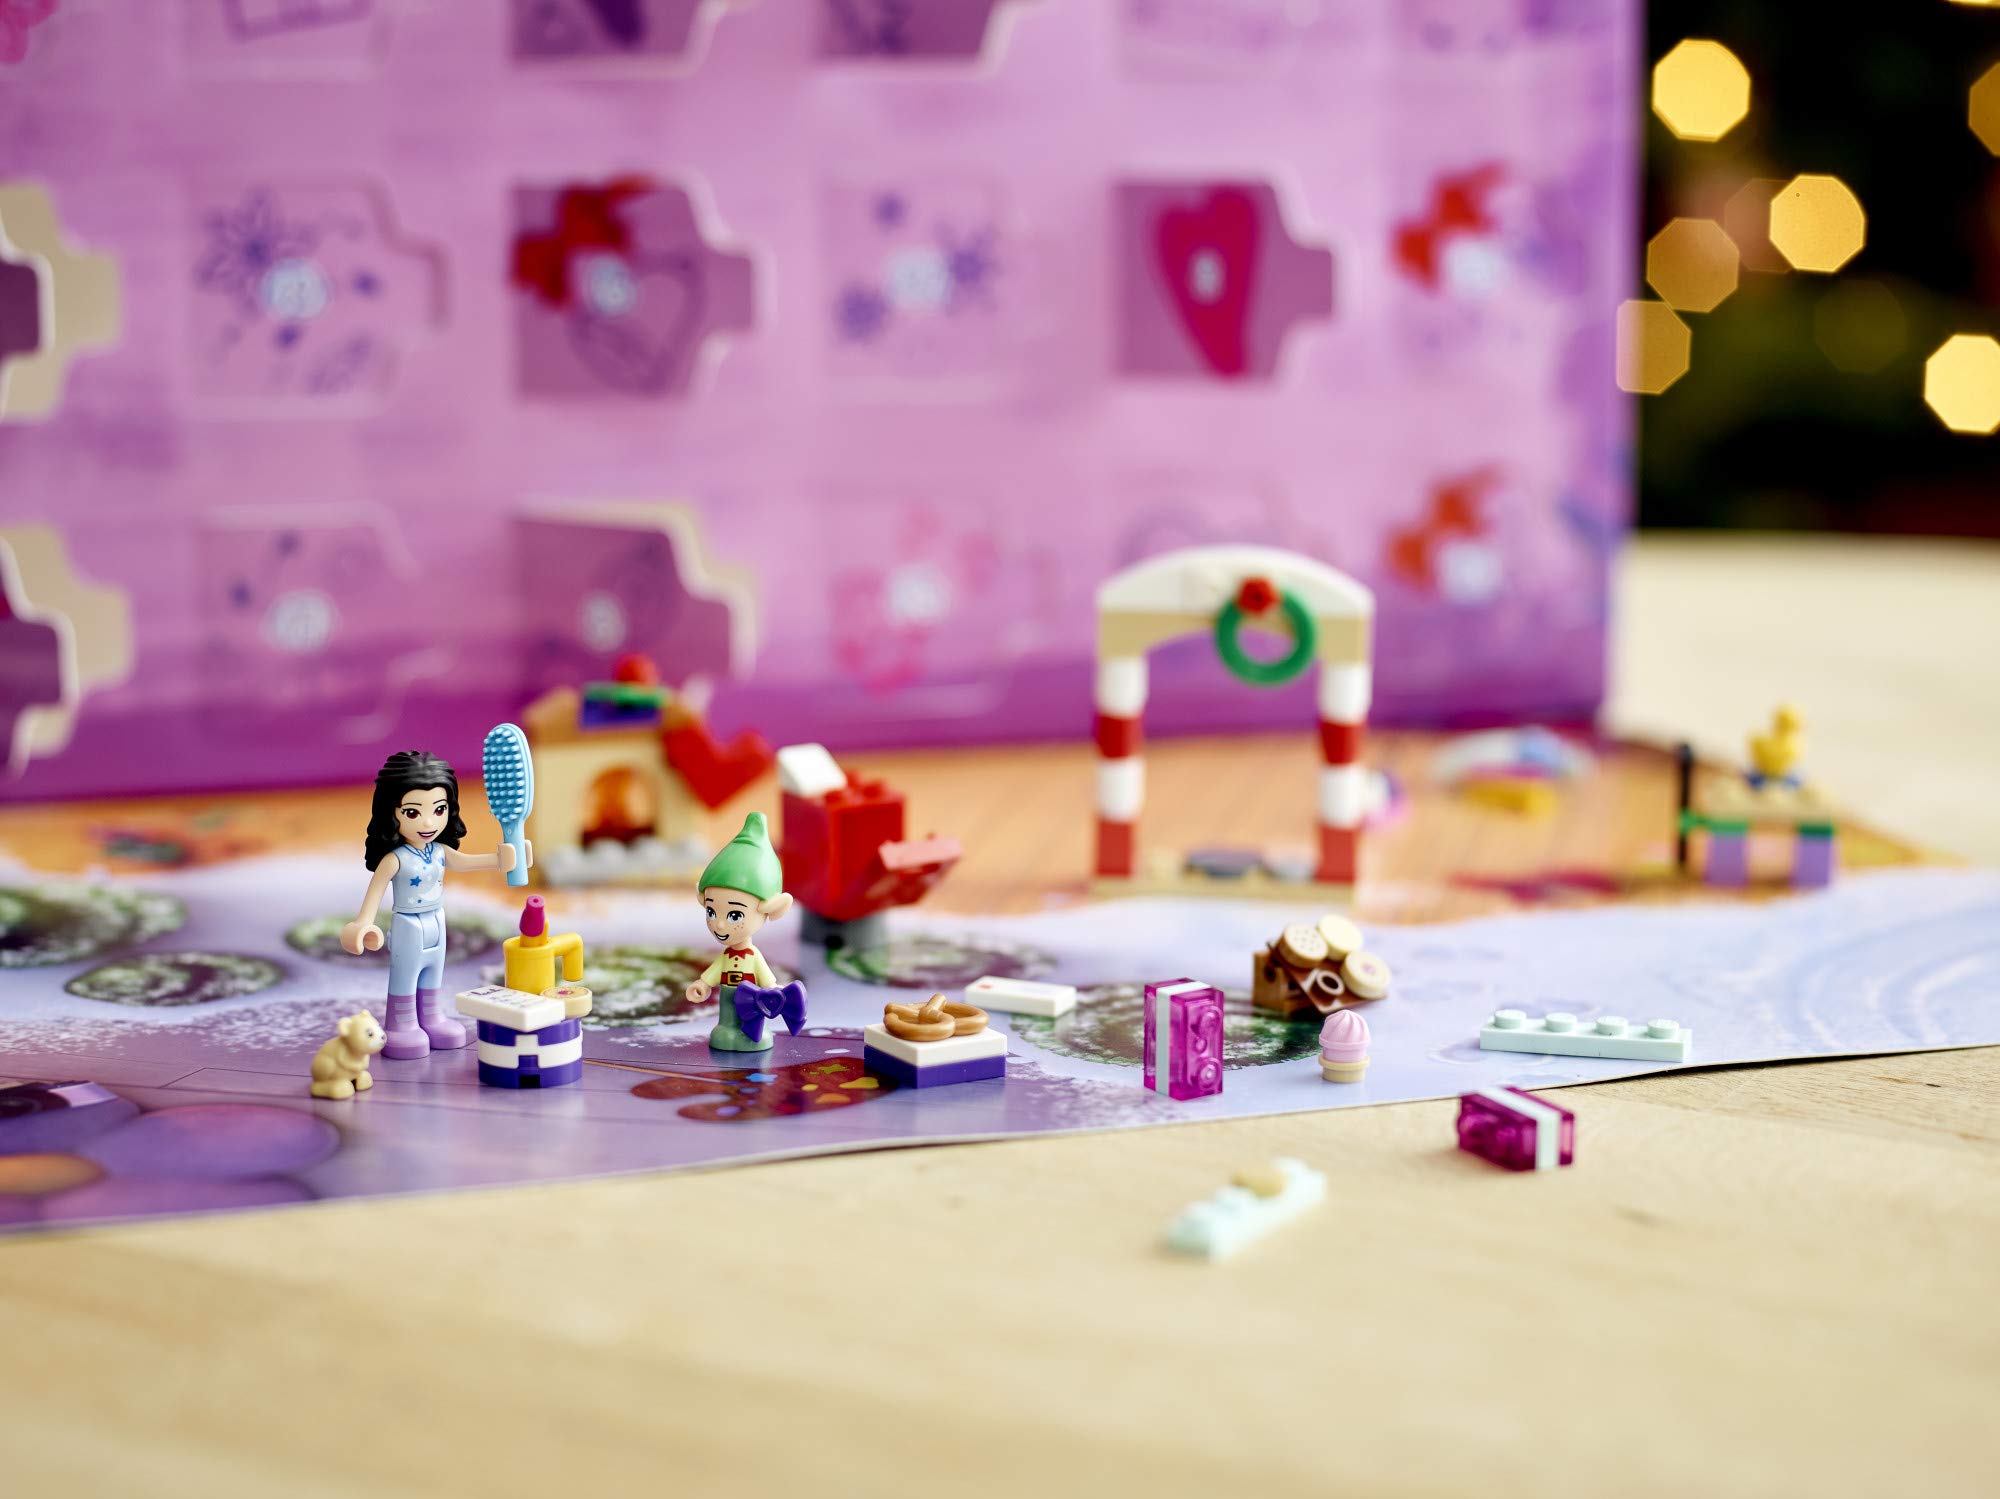 LEGO Friends 2020 Advent Calendar 41420, Kids Advent Calendar with toys; makes a great holiday treat for children who love toy Advent Calendars and buildable figures (236 Pieces)